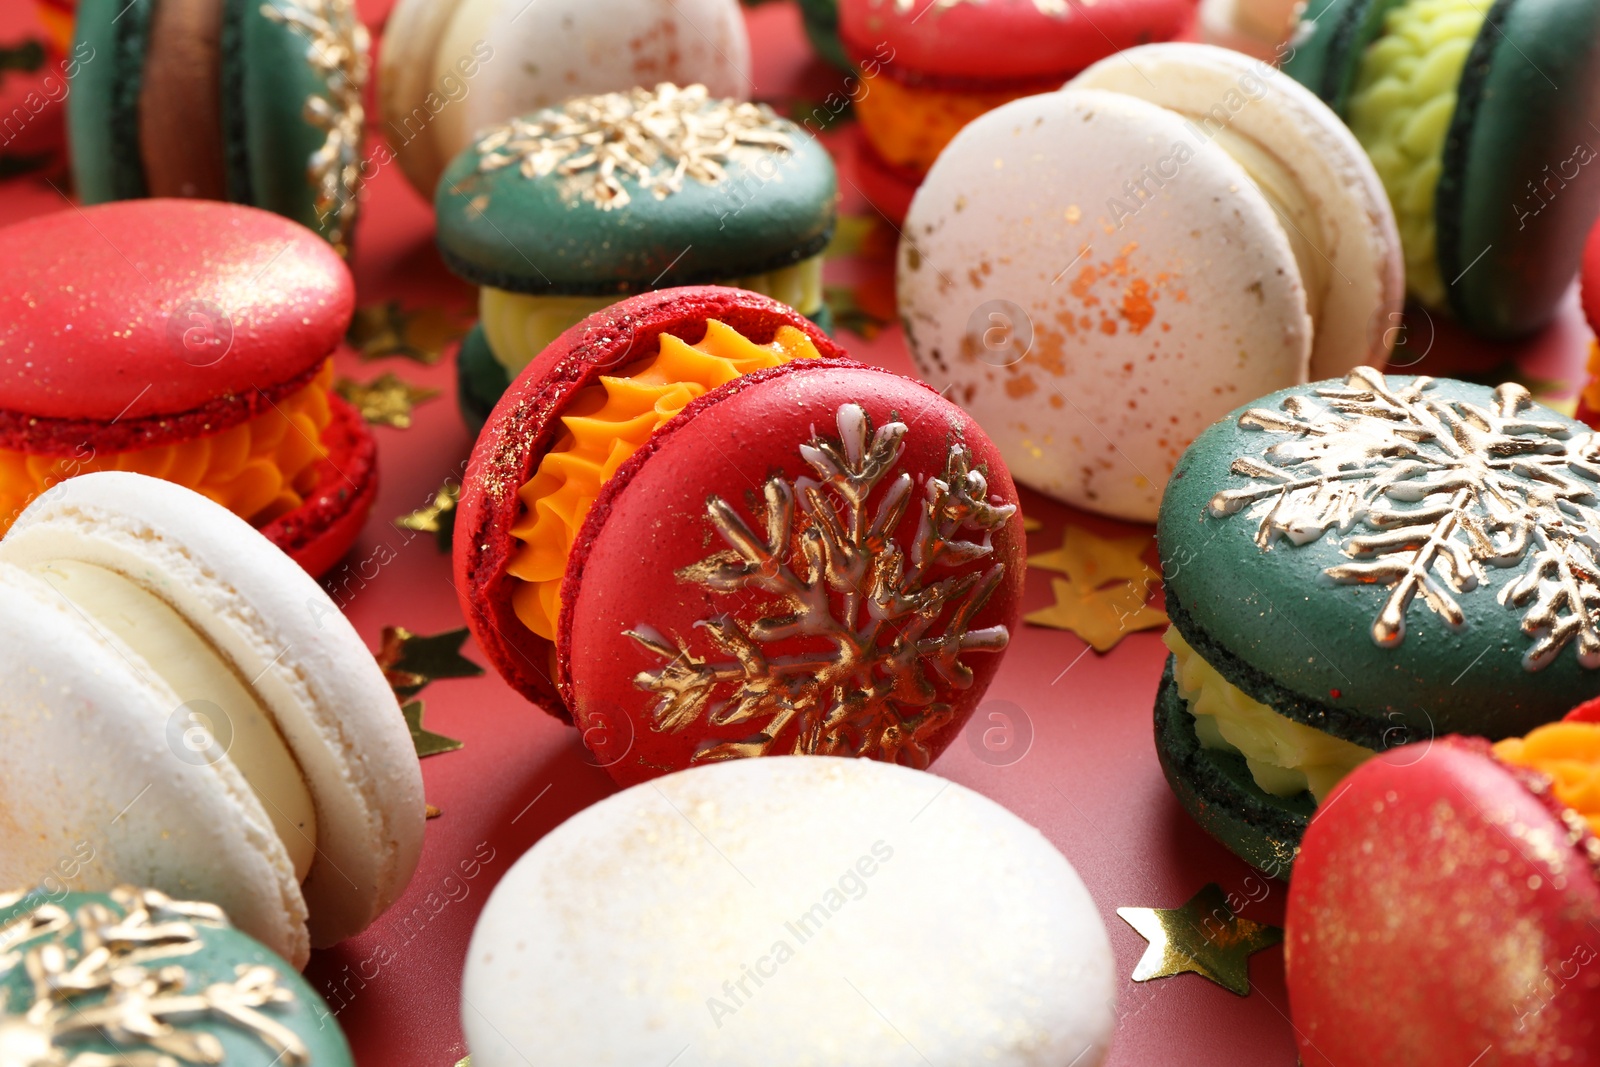 Photo of Beautifully decorated Christmas macarons and confetti on red background, closeup